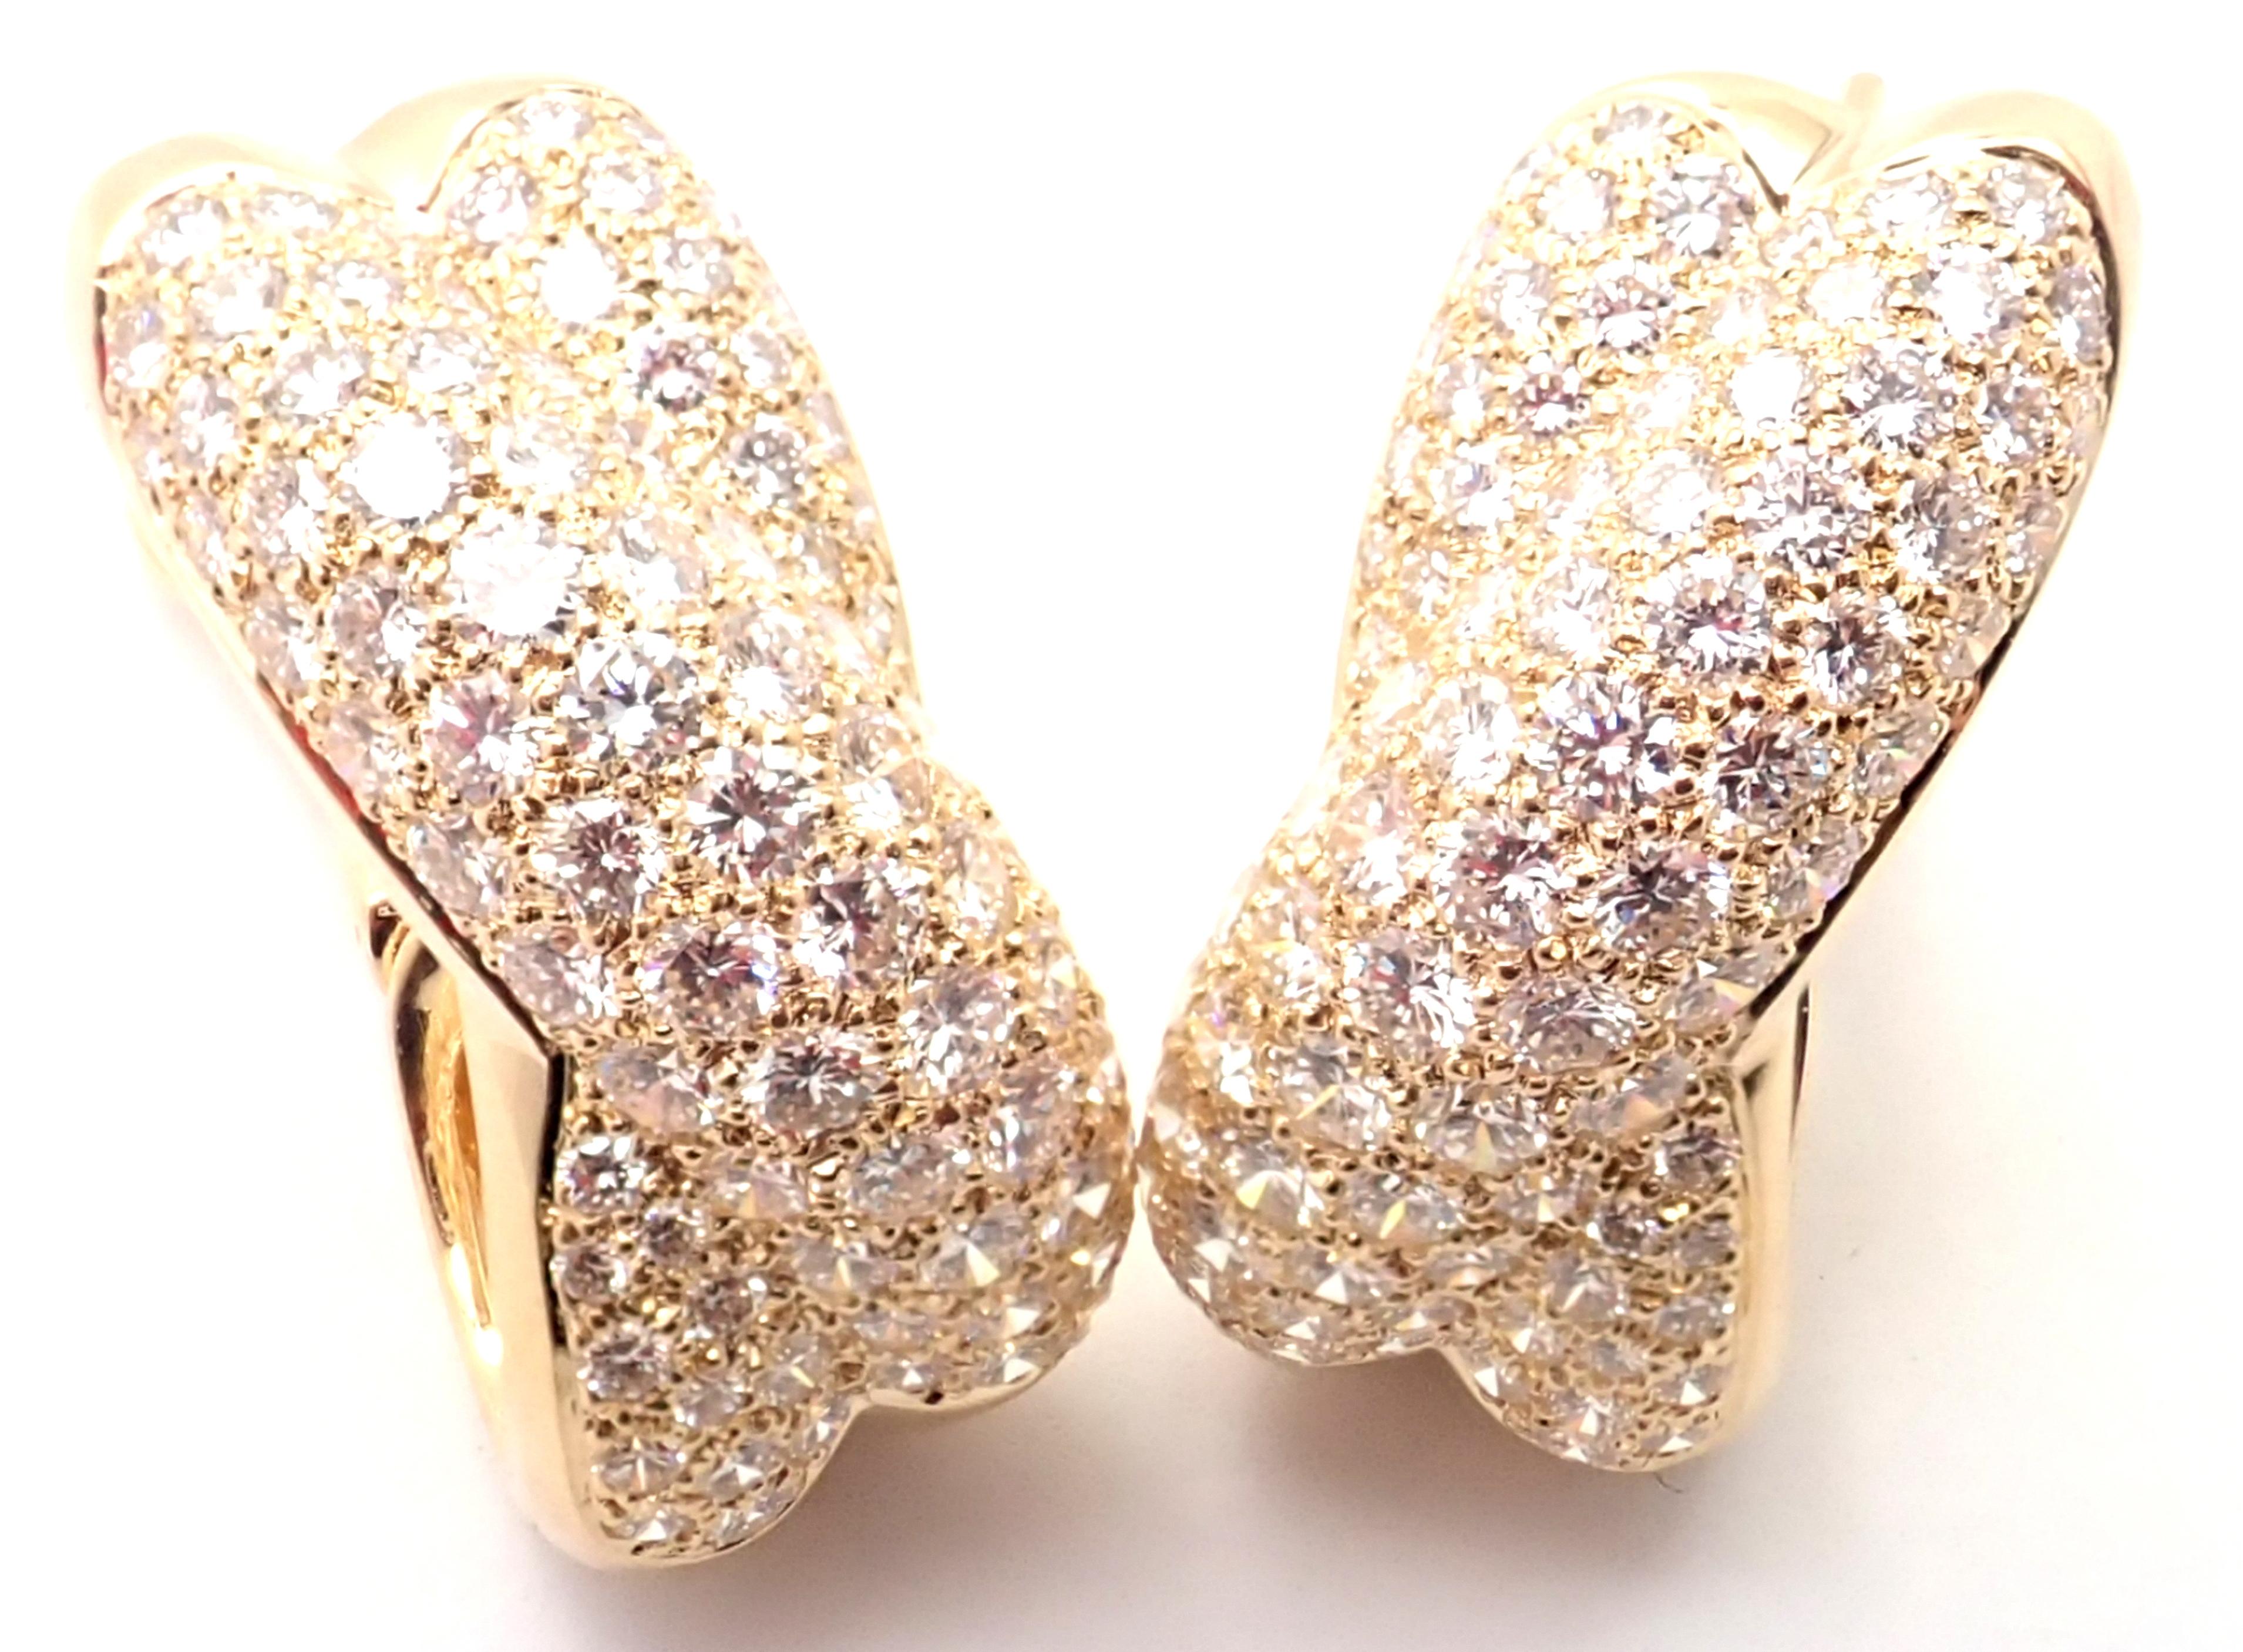 18k Yellow Gold Diamond Crossover Large Earrings by Cartier. 
With Round brilliant cut diamonds total weight approximately 5ct. 
Diamonds VVS1 clarity, E color
***Earrings are made for pierced ears.
Details:
Measurements: 26mm  x 12mm
Weight: 20.5